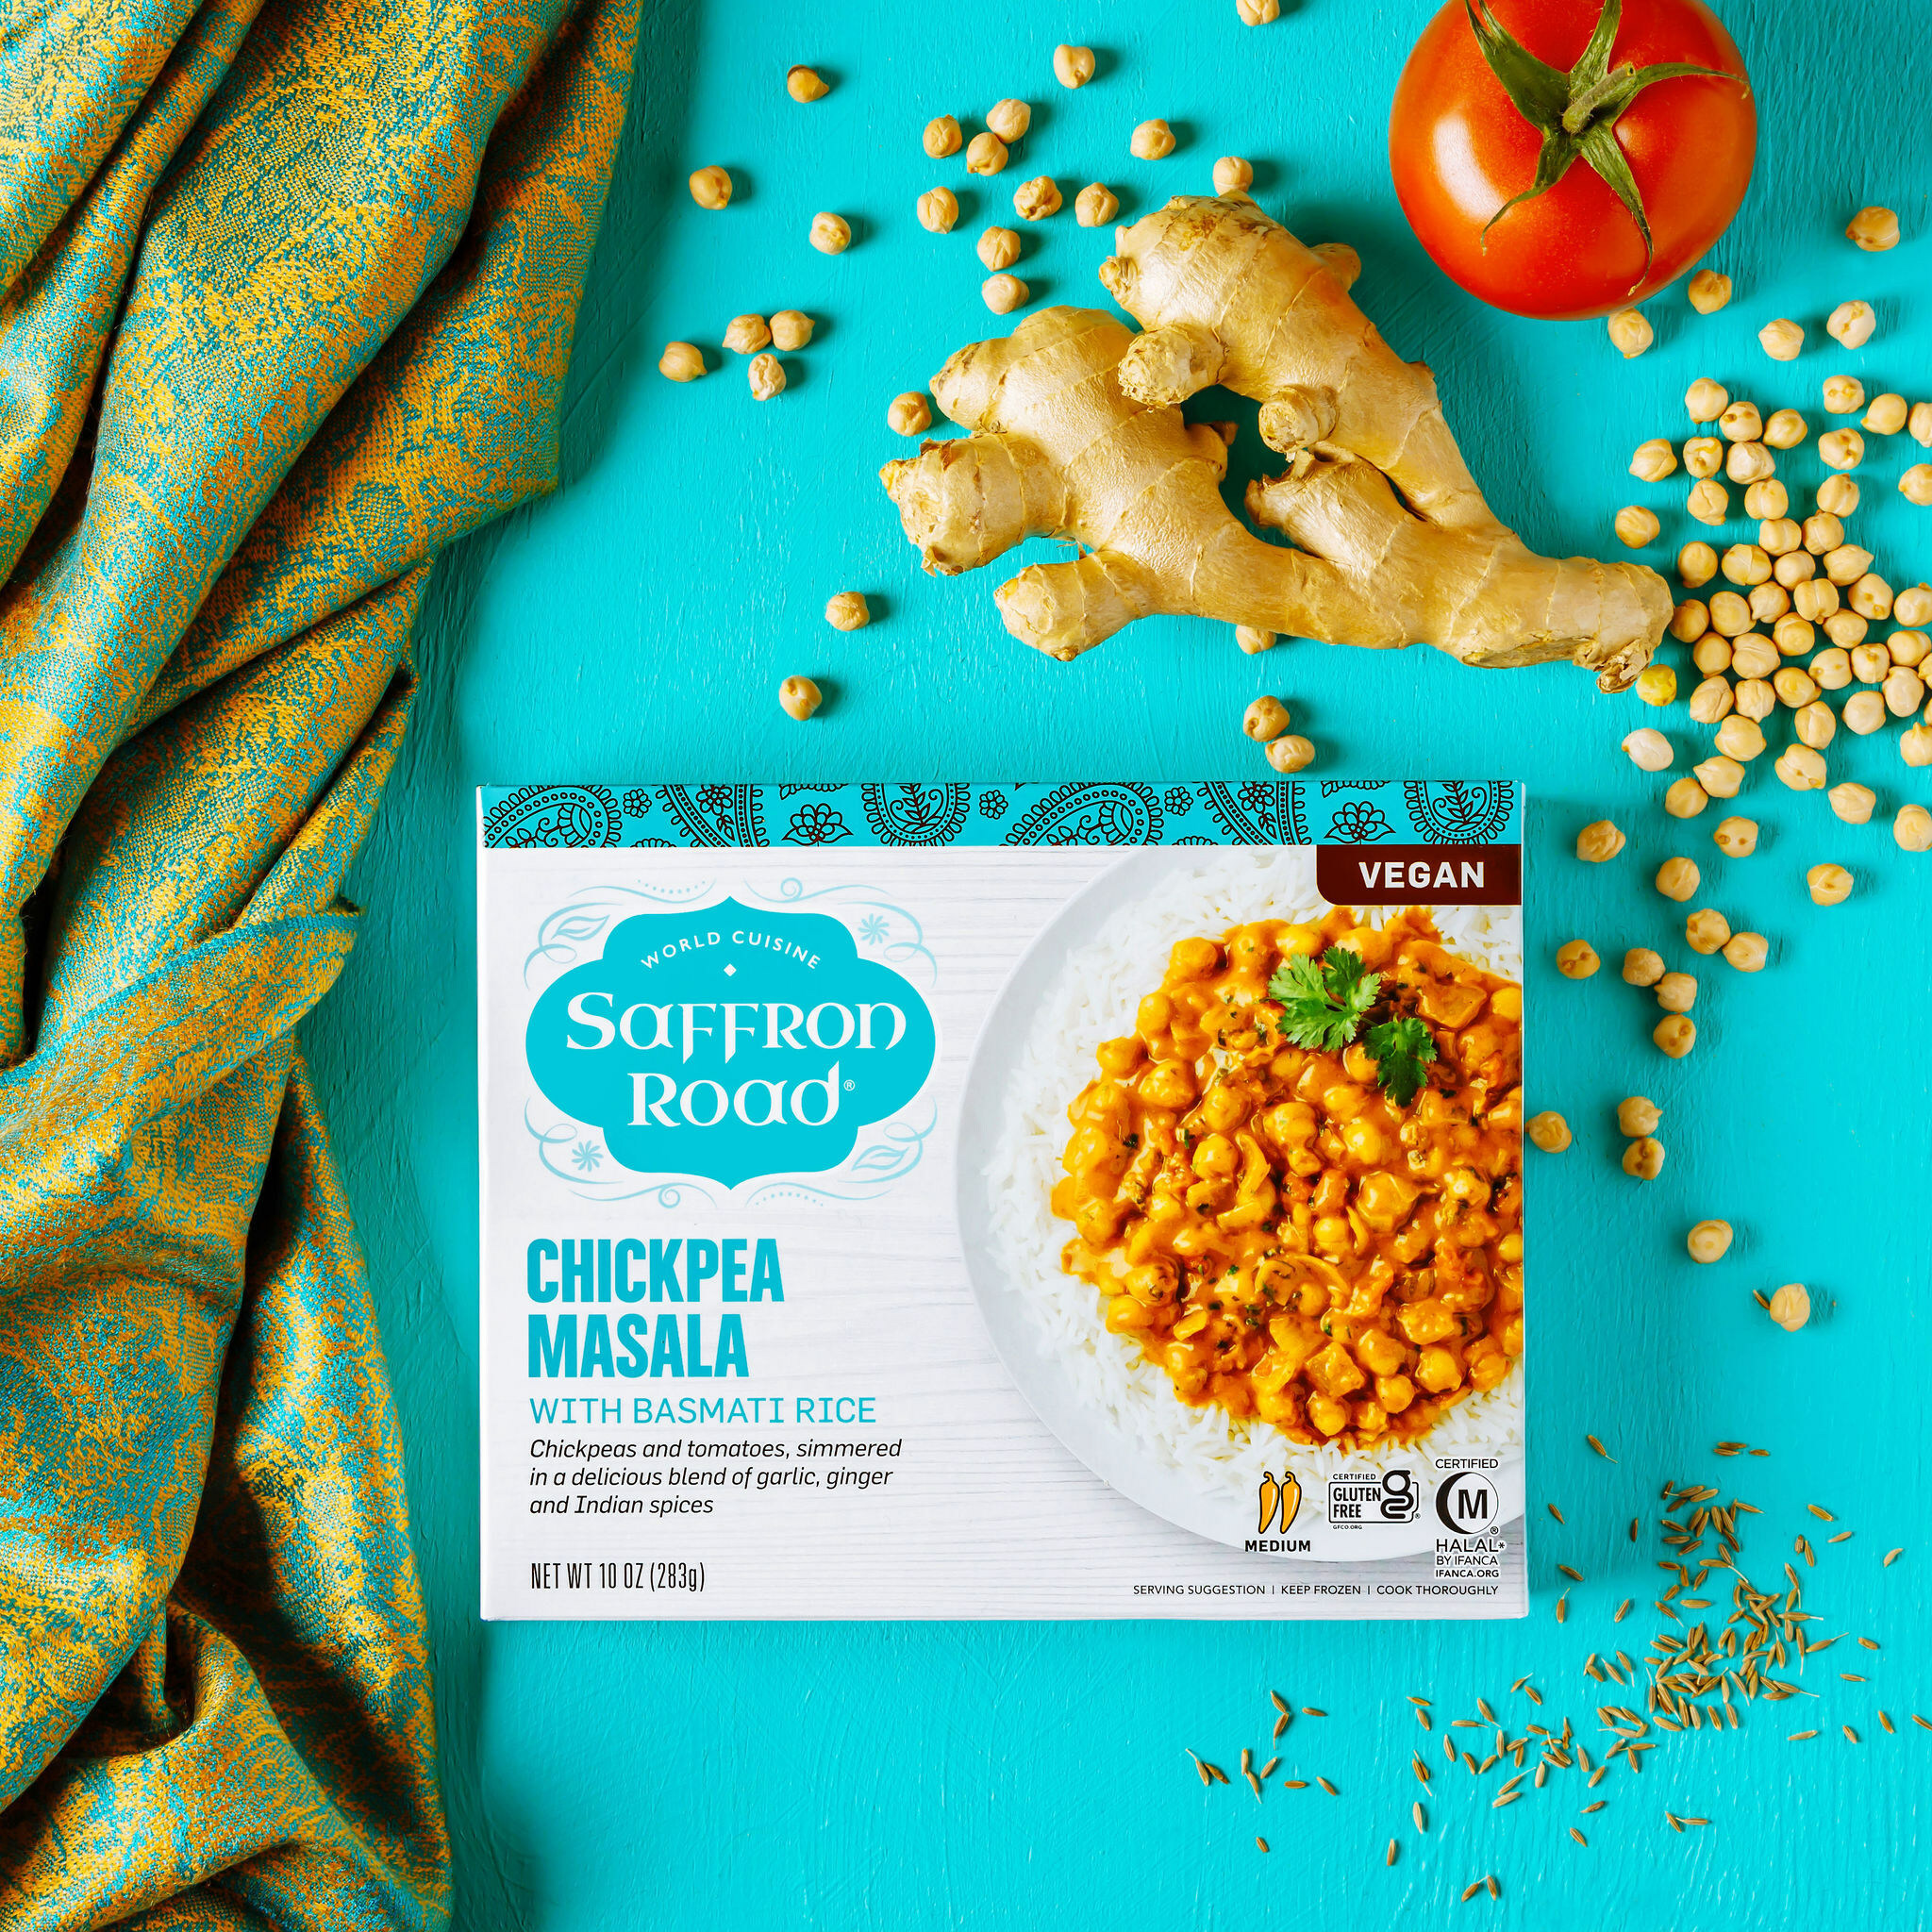 Chickpea Masala box with ingredients